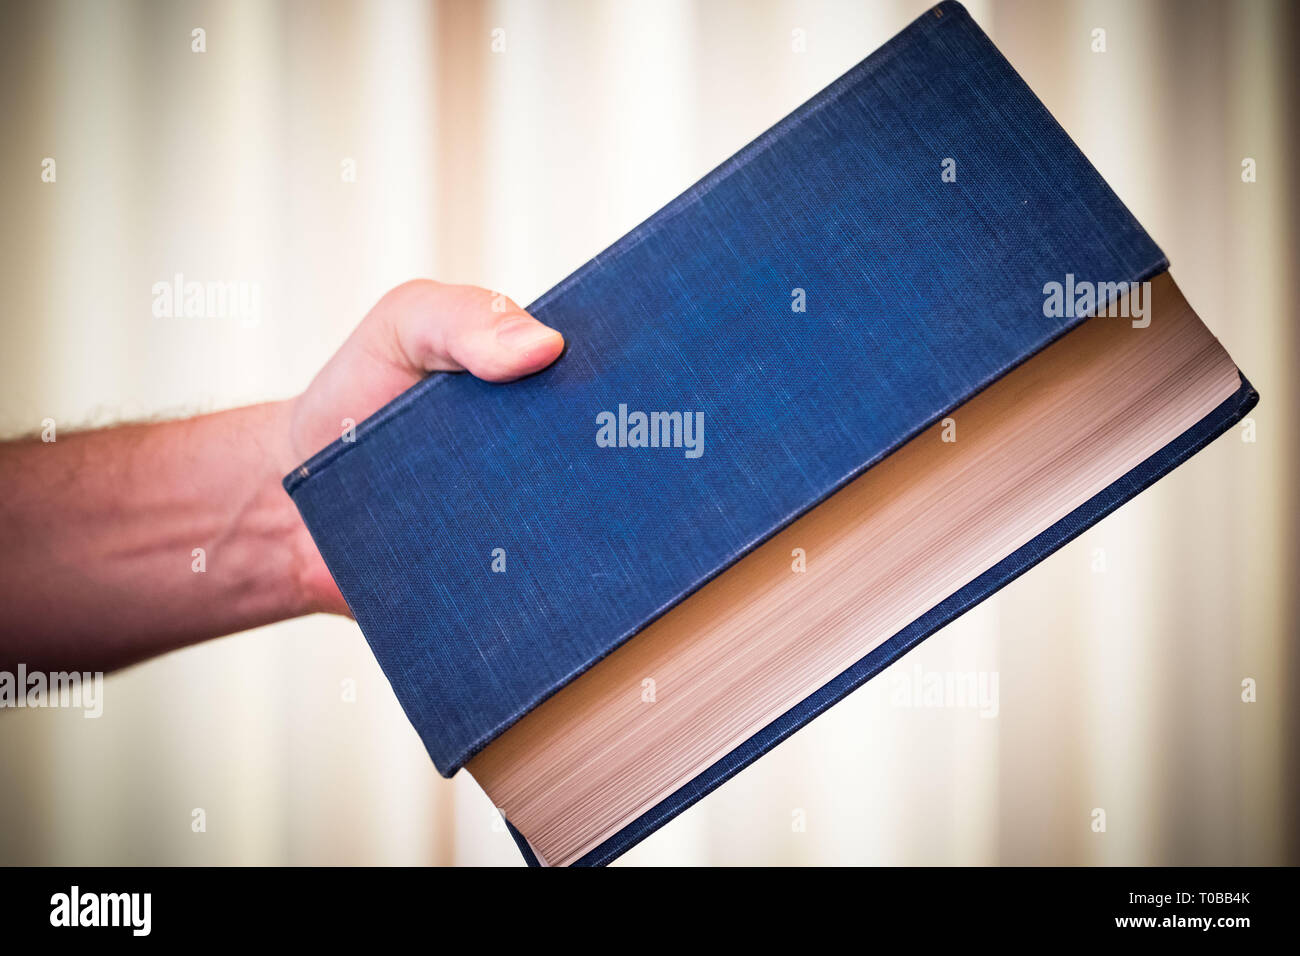 Big heavy blue book in hand; handing to (or throwing the book at) someone. Stock Photo